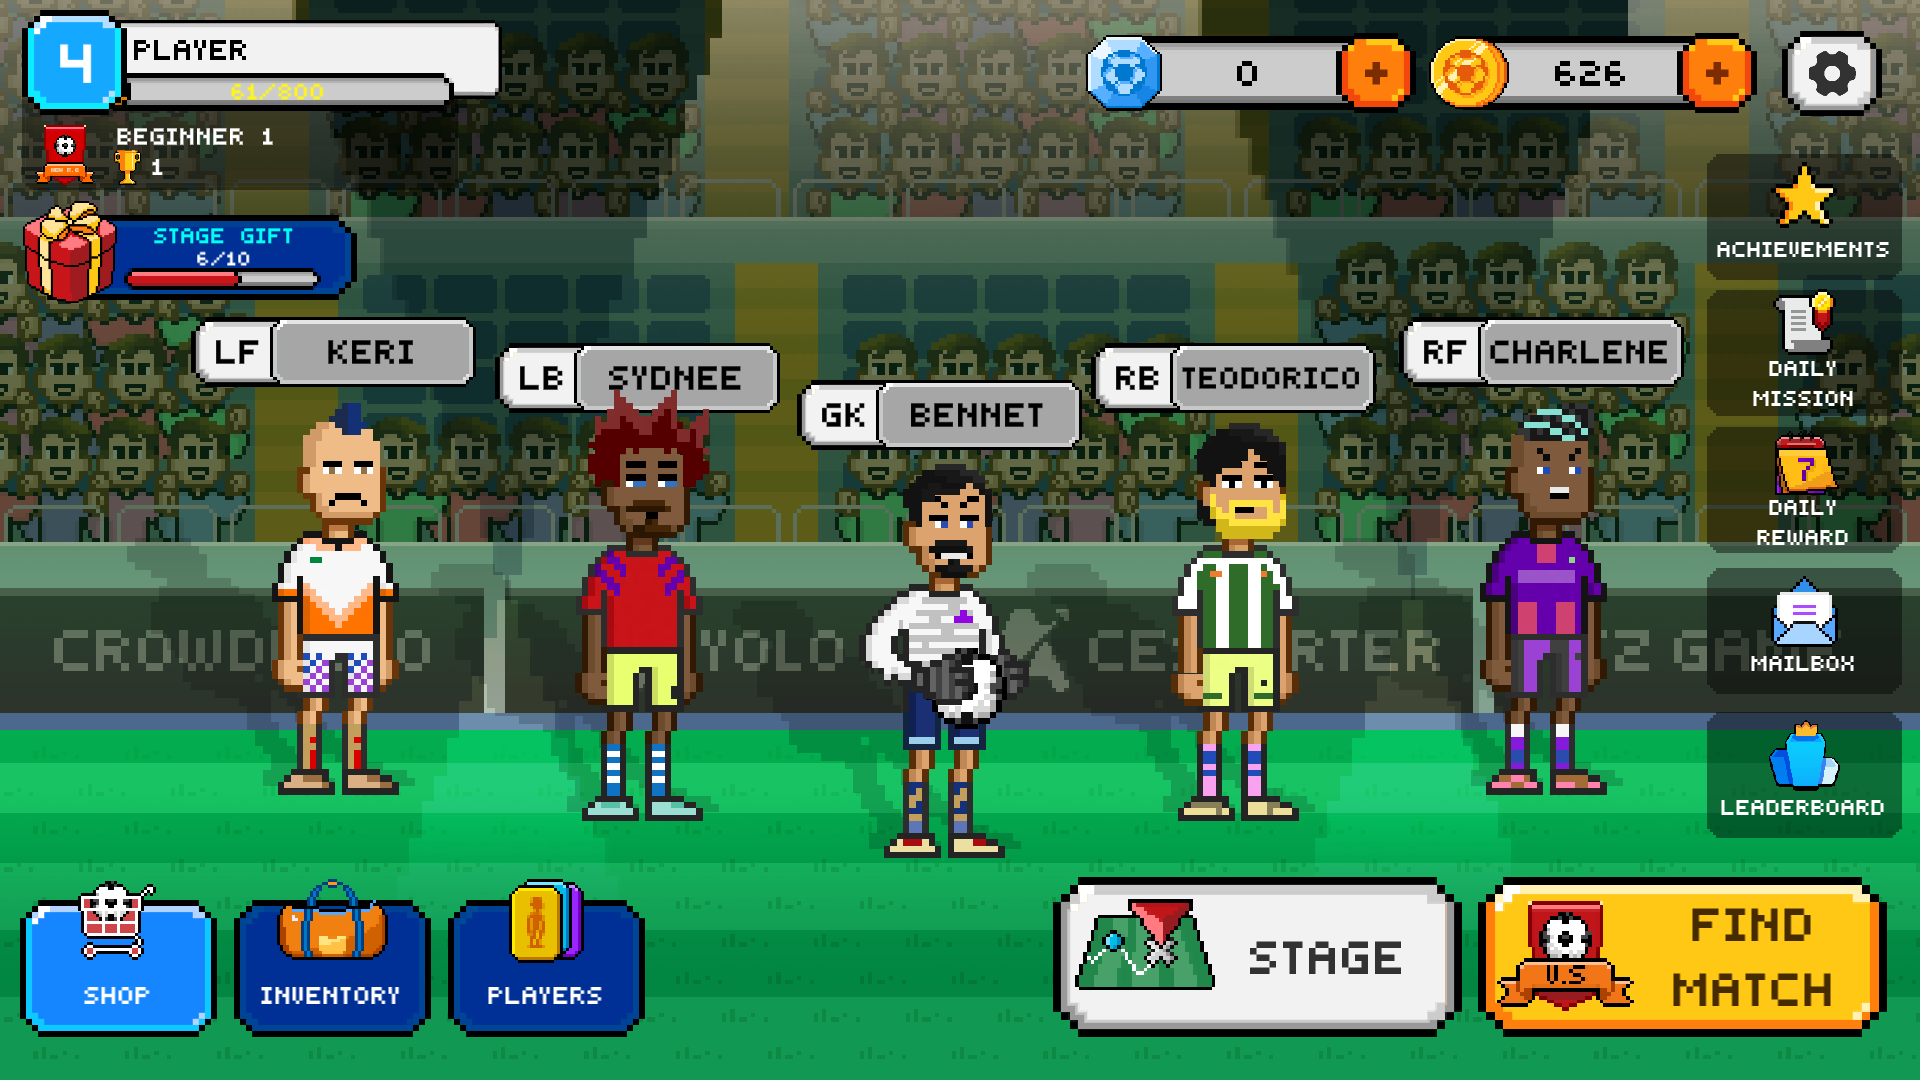 game image from Football Battle